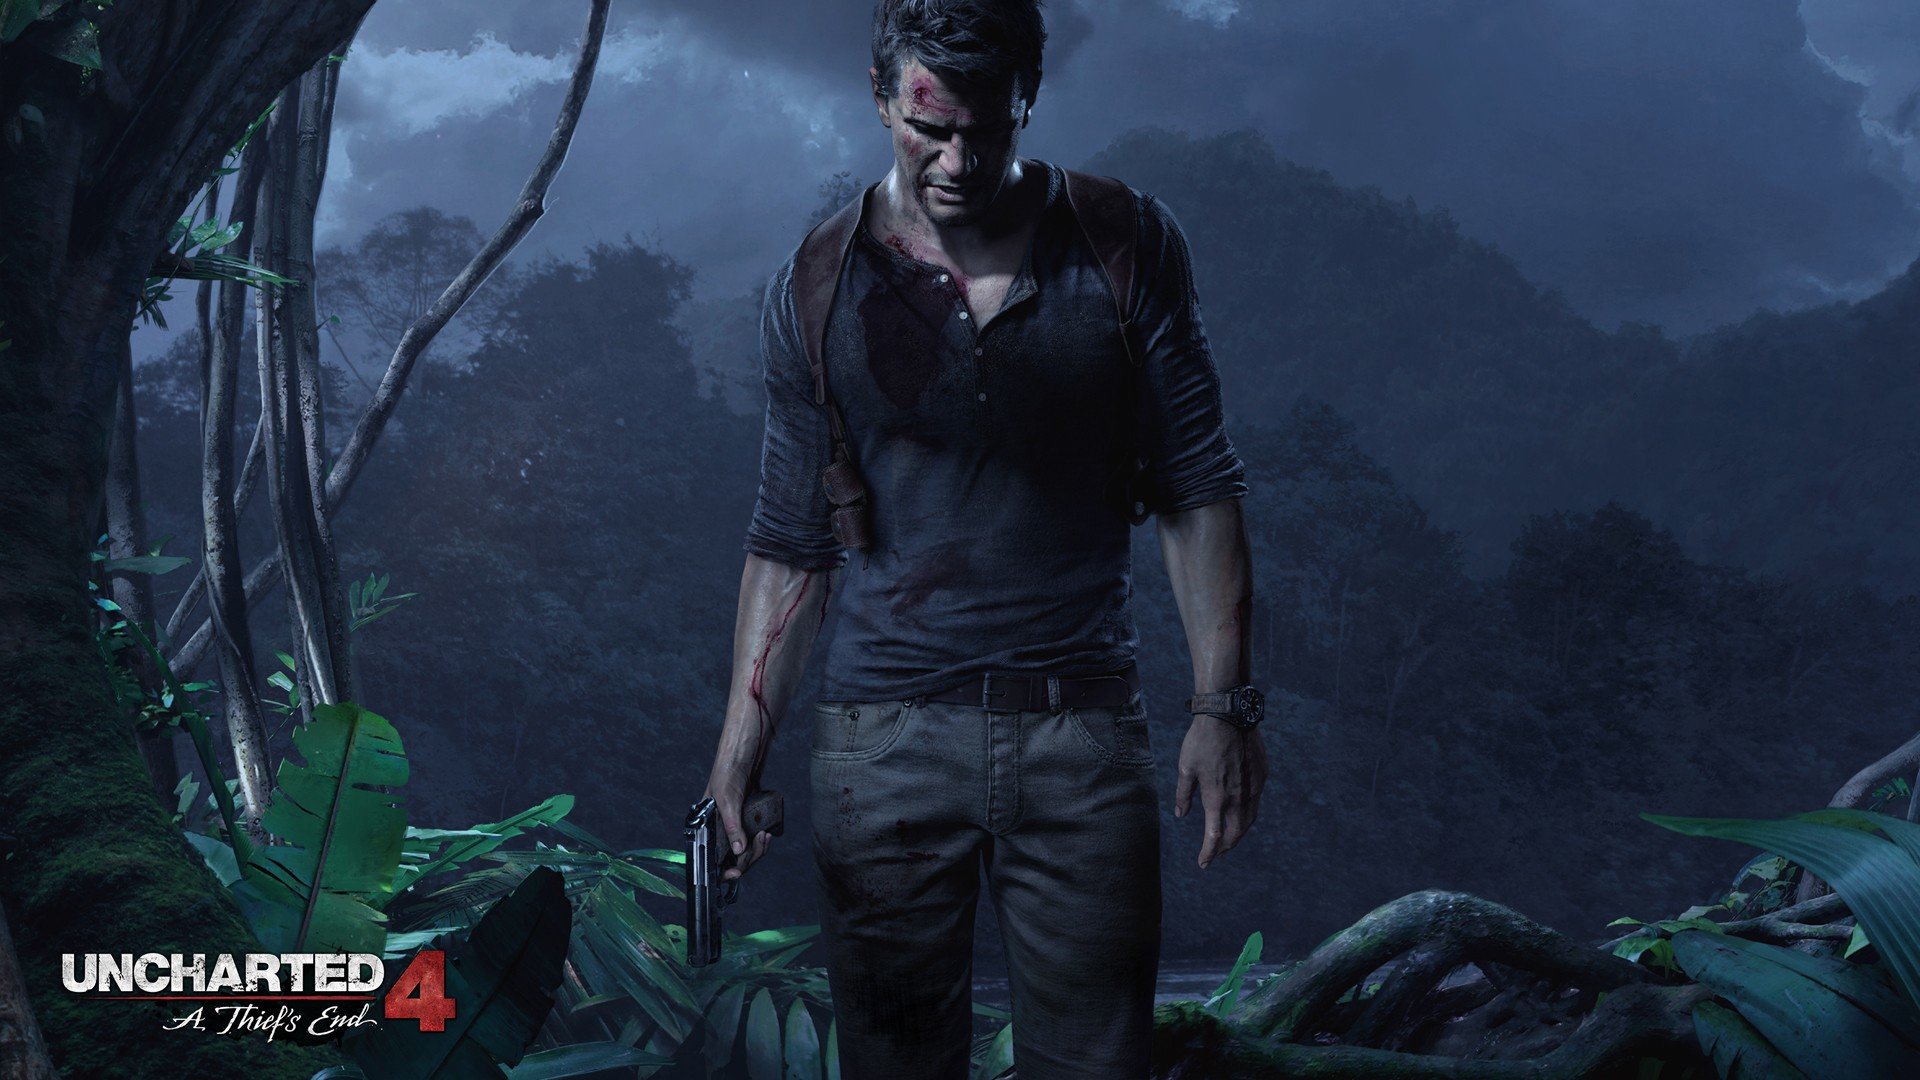 Download full hd 1920x1080 Uncharted 4: A Thief's End computer wallpaper ID:498176 for free